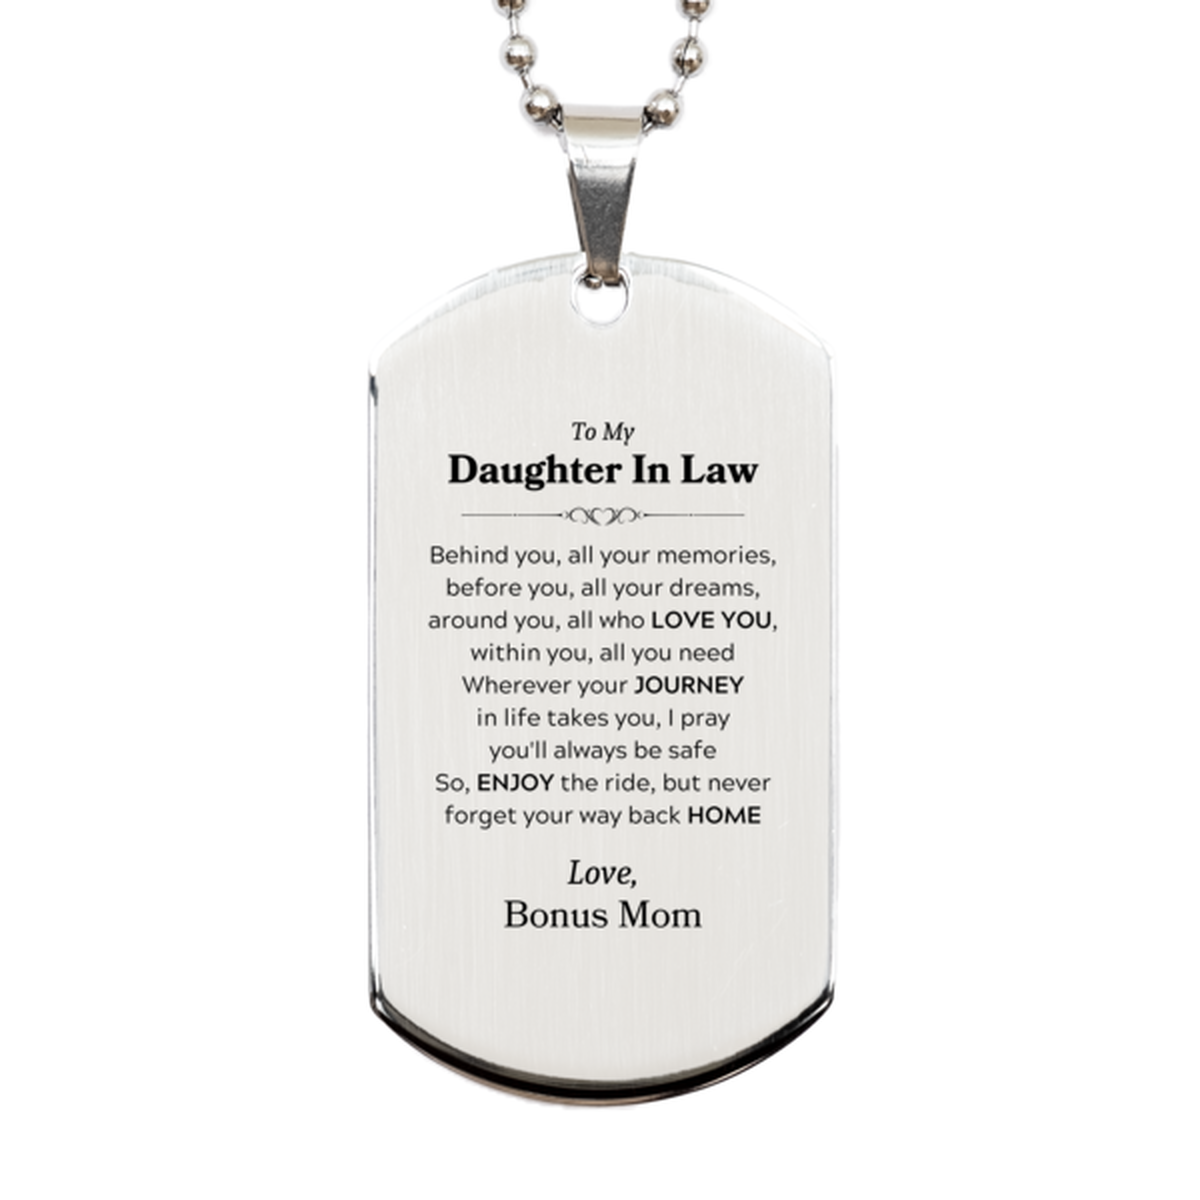 To My Daughter In Law Graduation Gifts from Bonus Mom, Daughter In Law Silver Dog Tag Christmas Birthday Gifts for Daughter In Law Behind you, all your memories, before you, all your dreams. Love, Bonus Mom